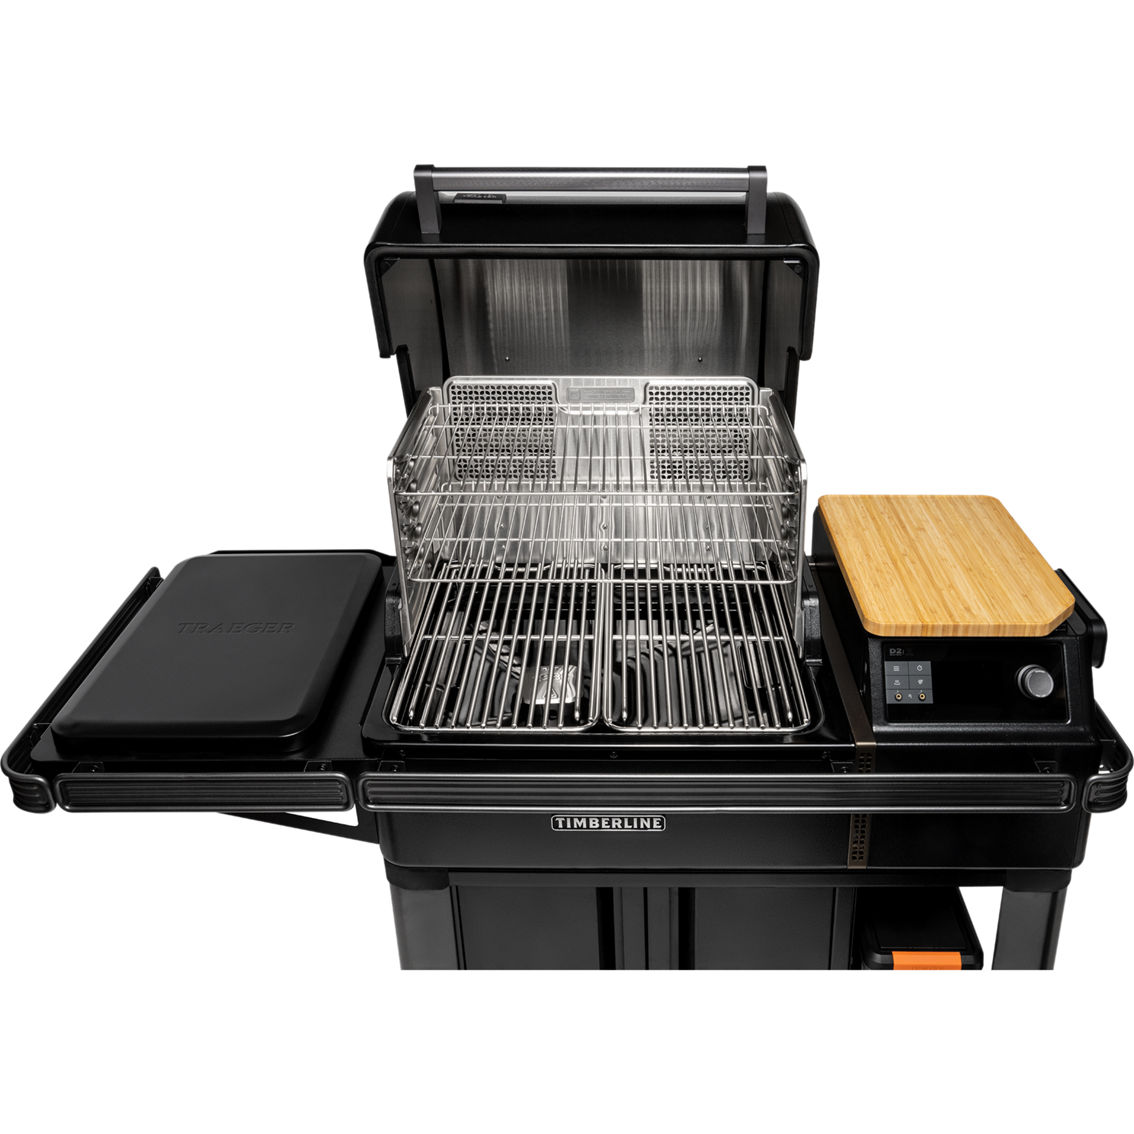 Traeger New Timberline Wood Pellet Grill - Image 4 of 7